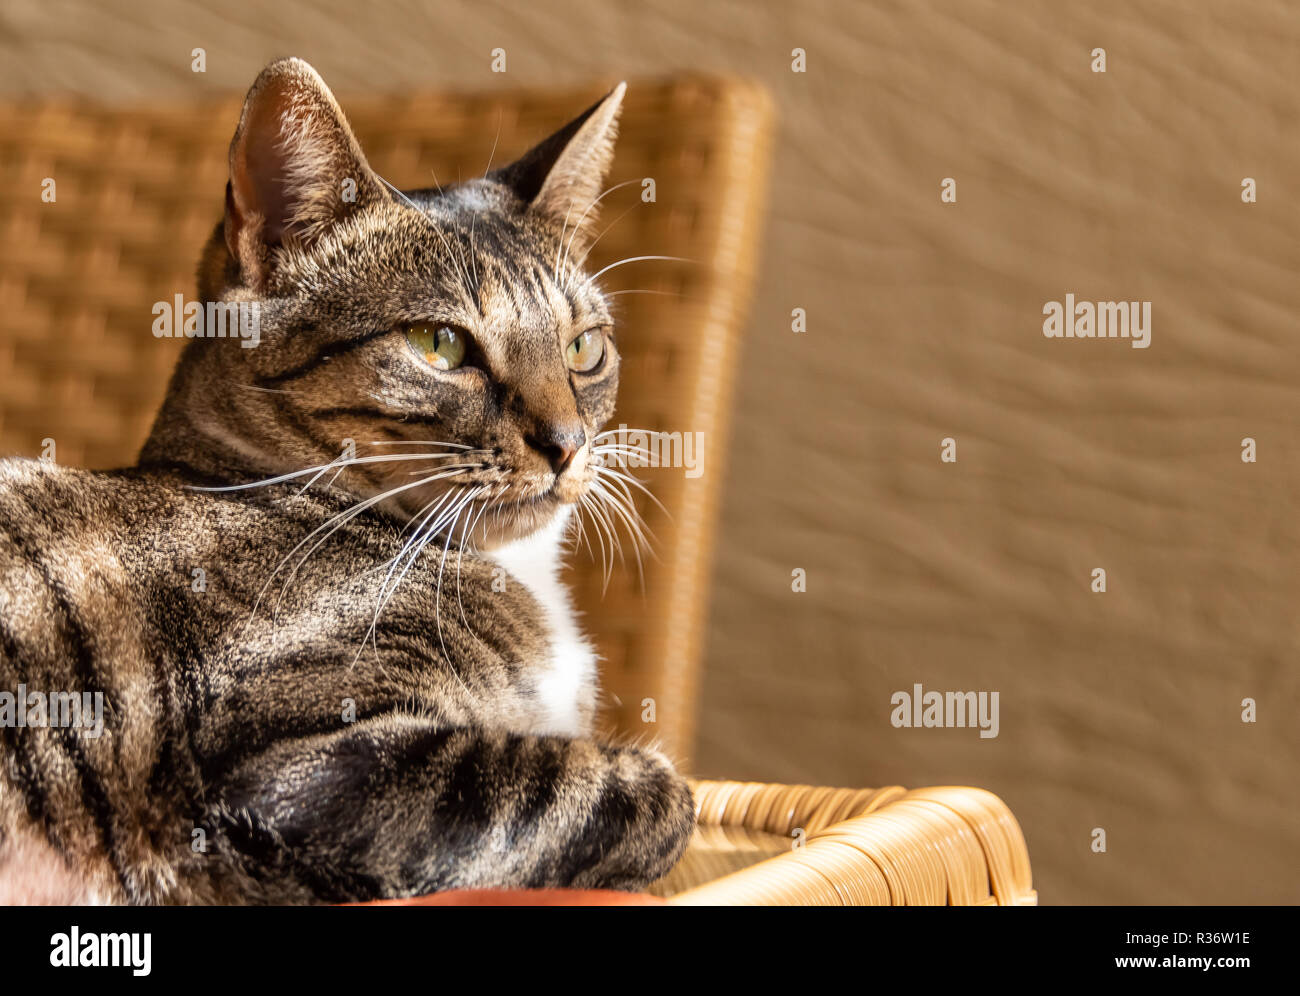 Sun rays on cat relaxing Stock Photo